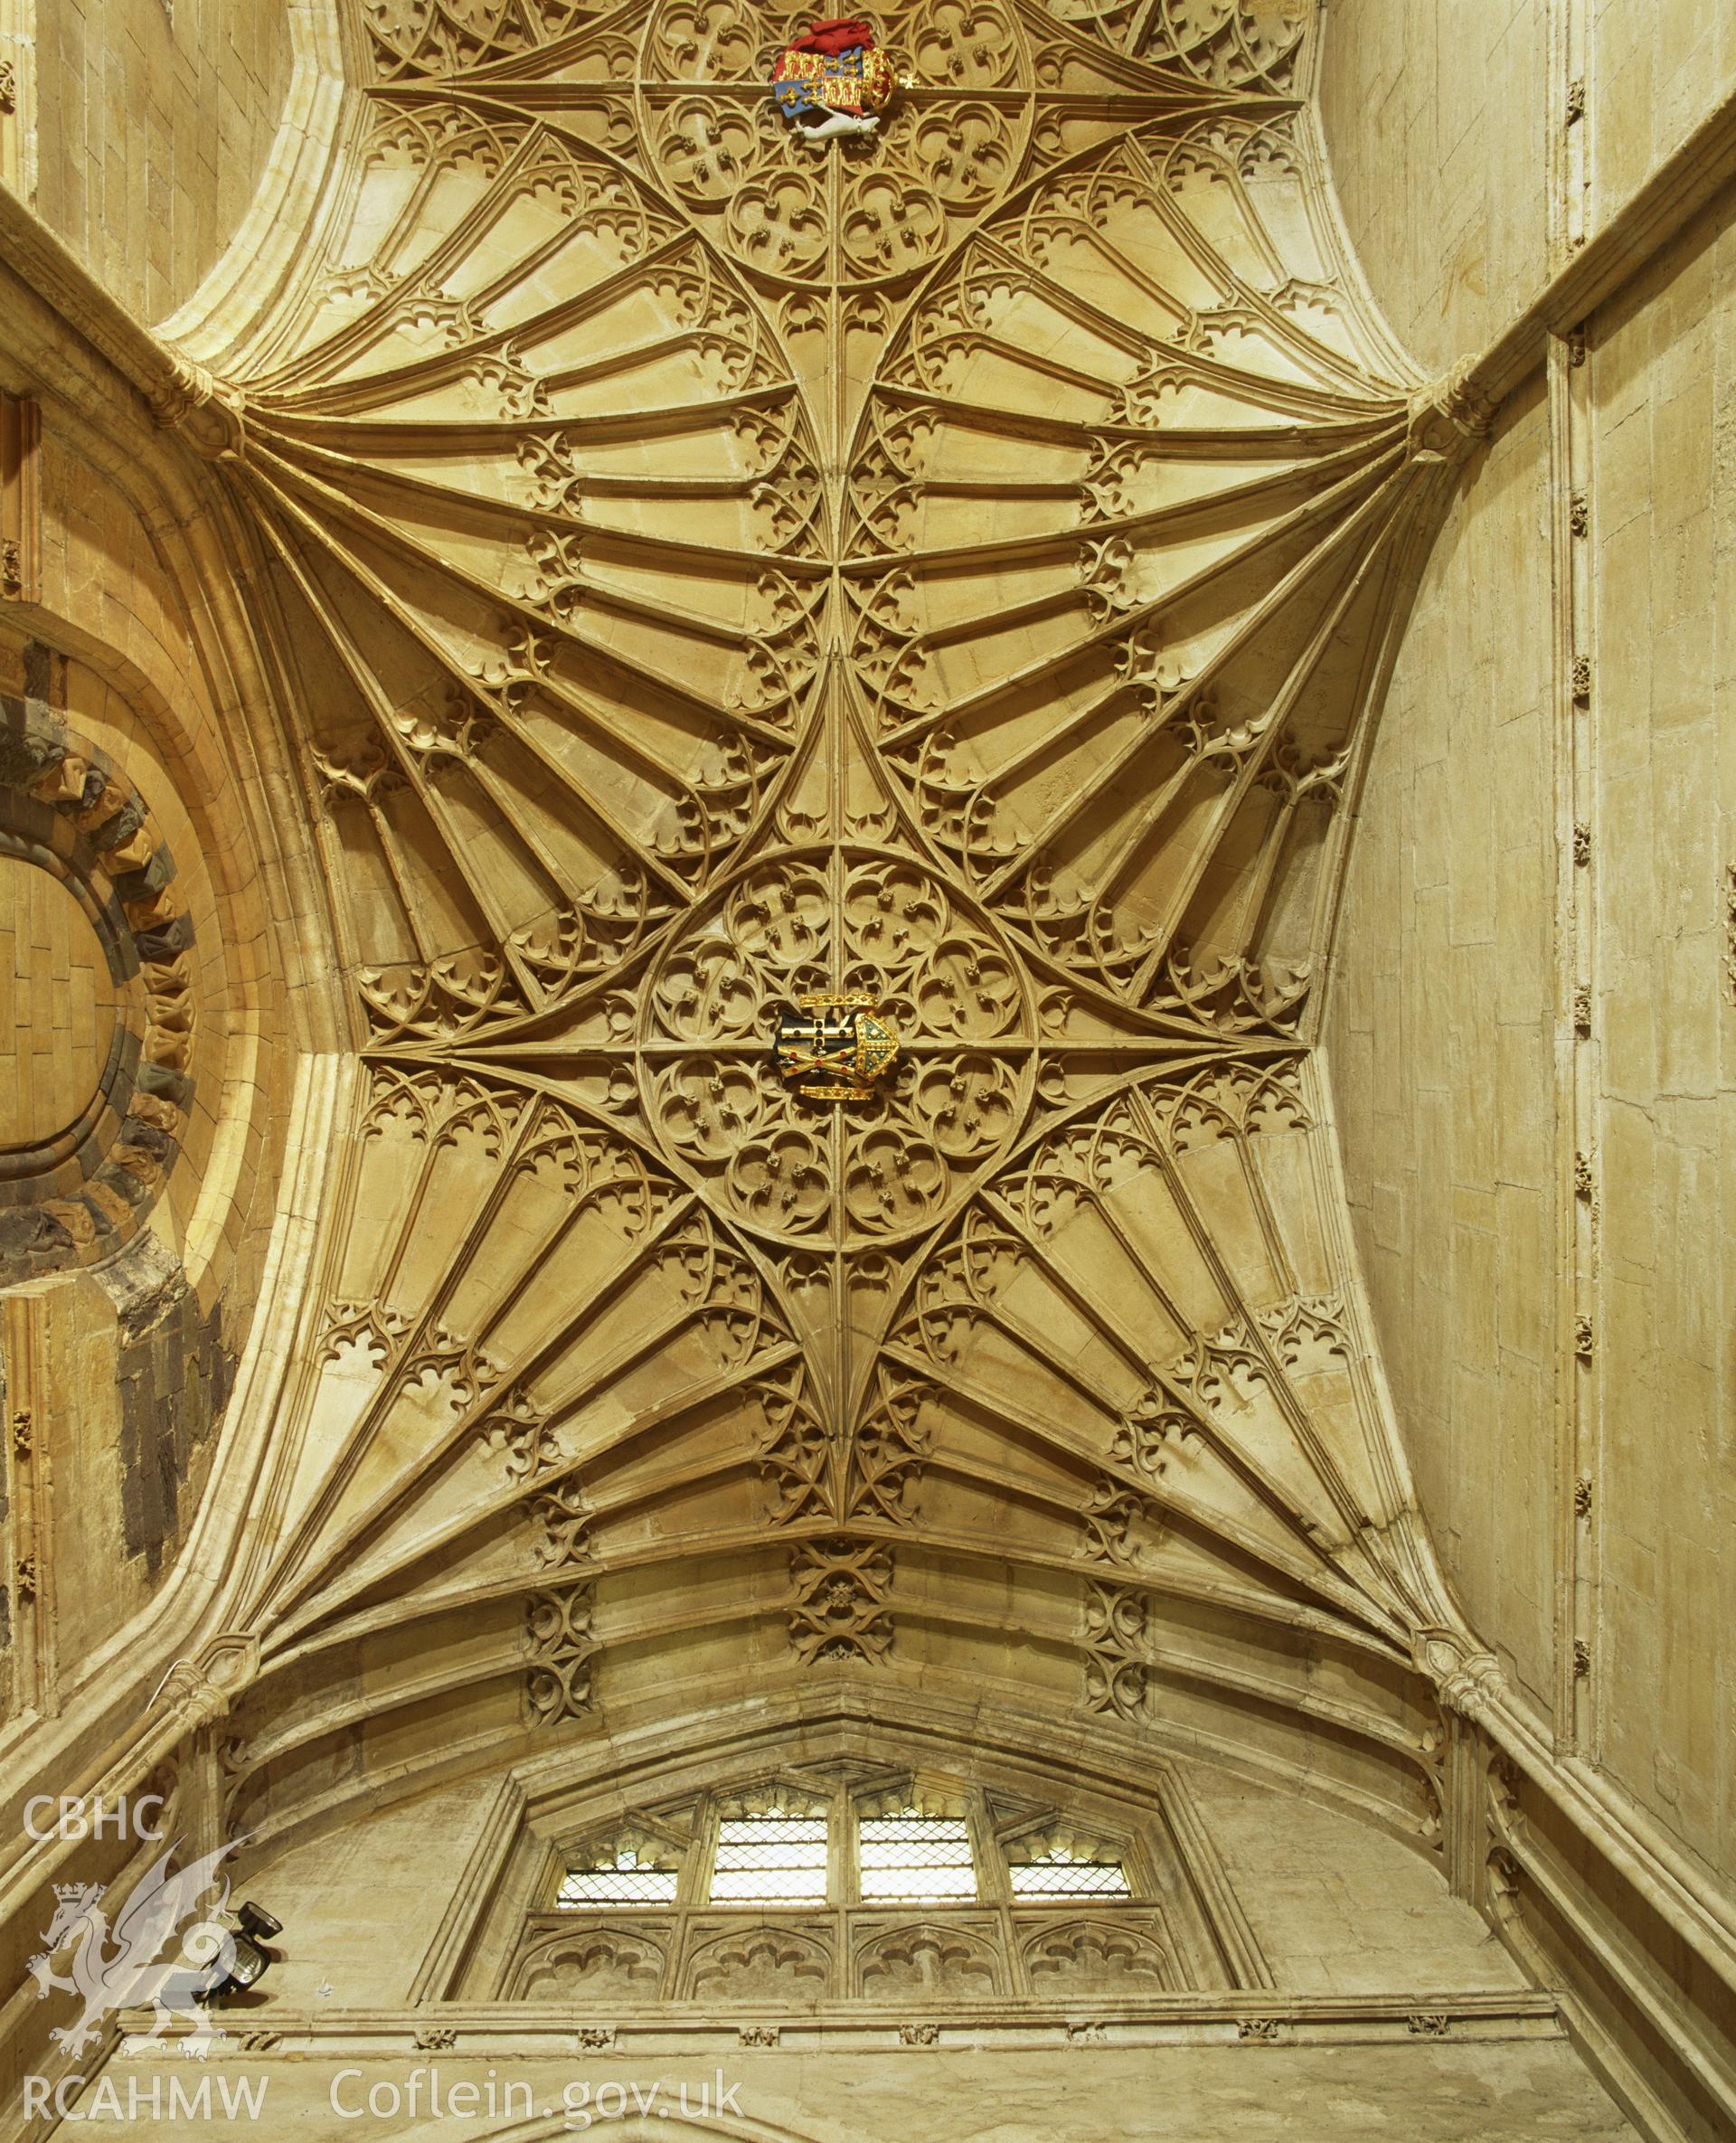 RCAHMW colour transparency showing view of the vaulting in the Vaughan Chapel, St David's Cathedral, taken by I.N. Wright, 2003.